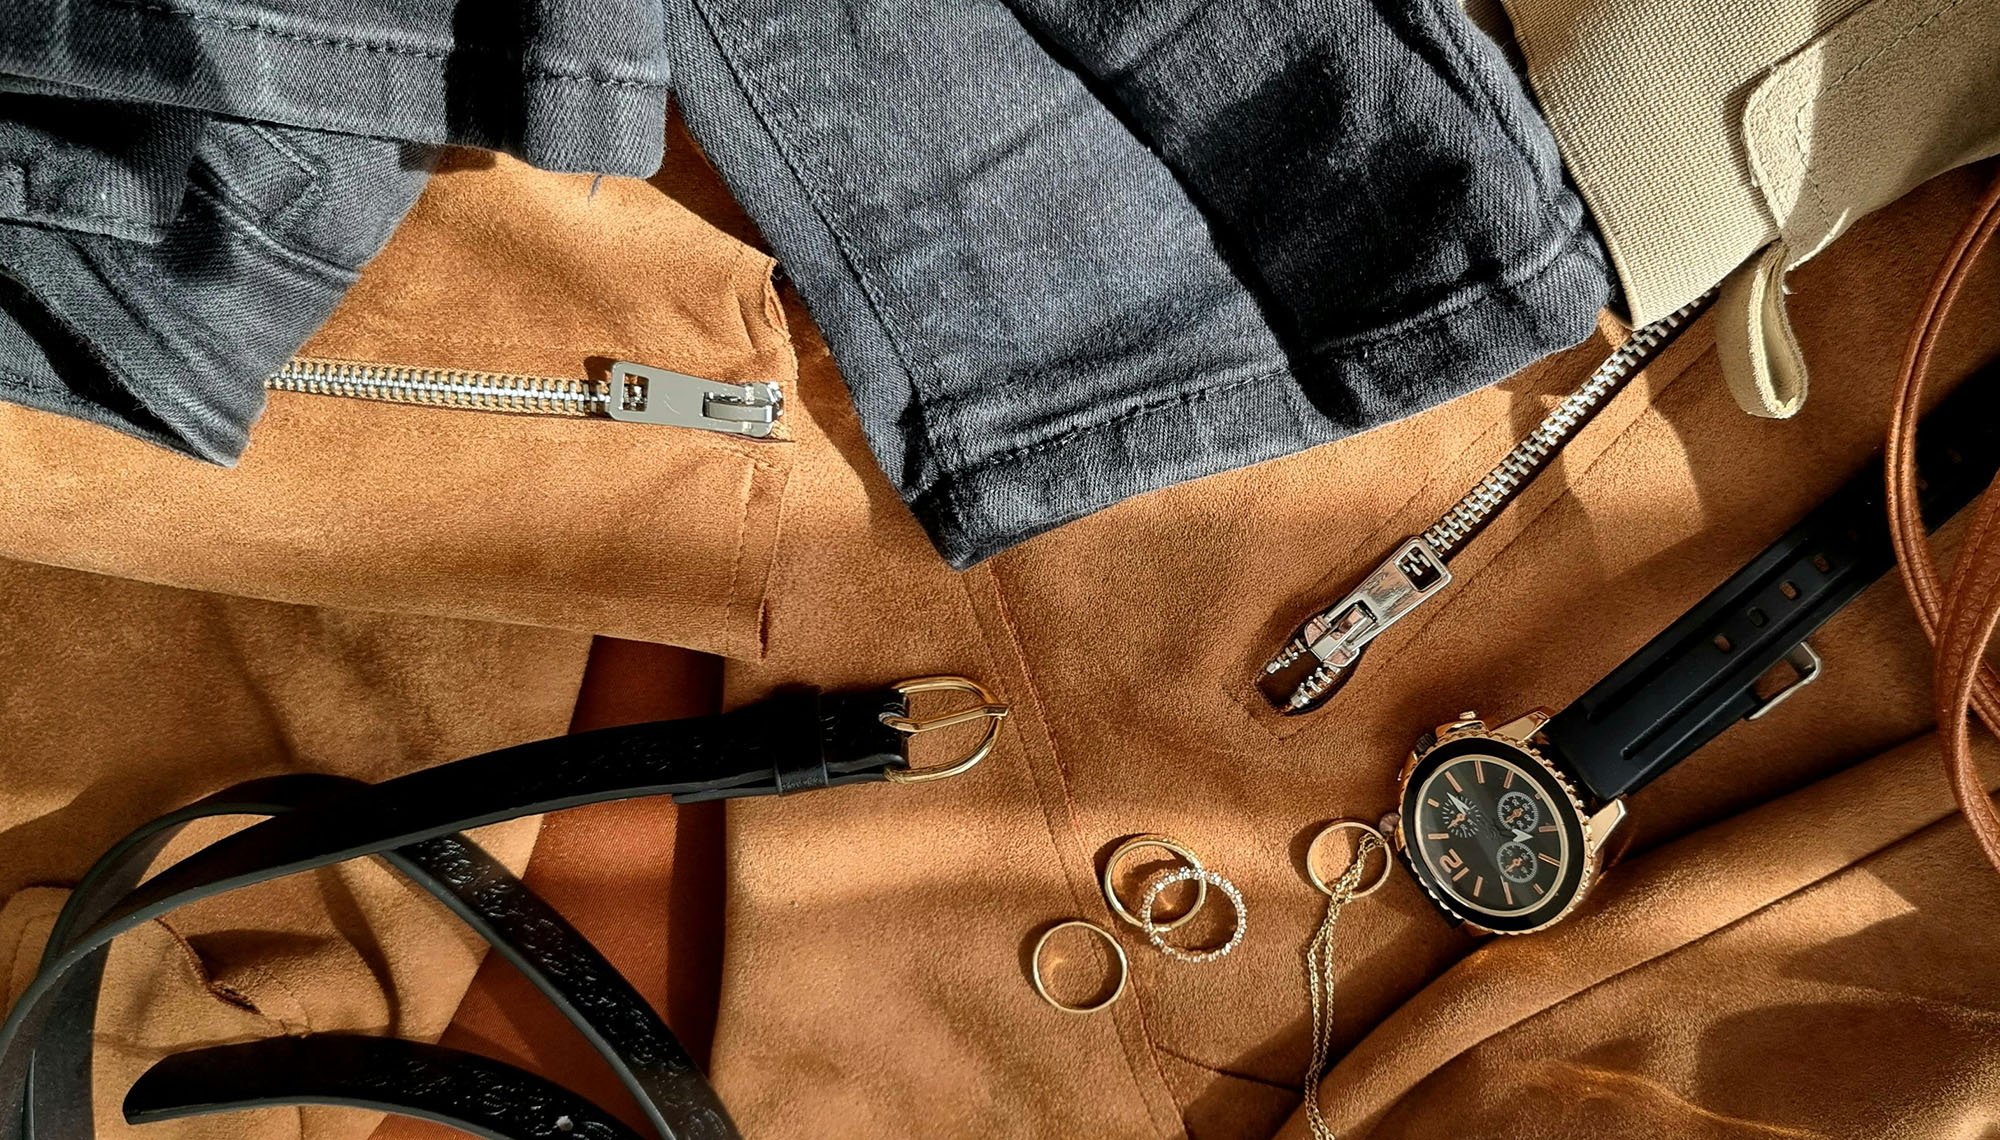 an image showing varous casual clothing items and accessories such as watch, rings, zippers, belt, with sunlight shining on them